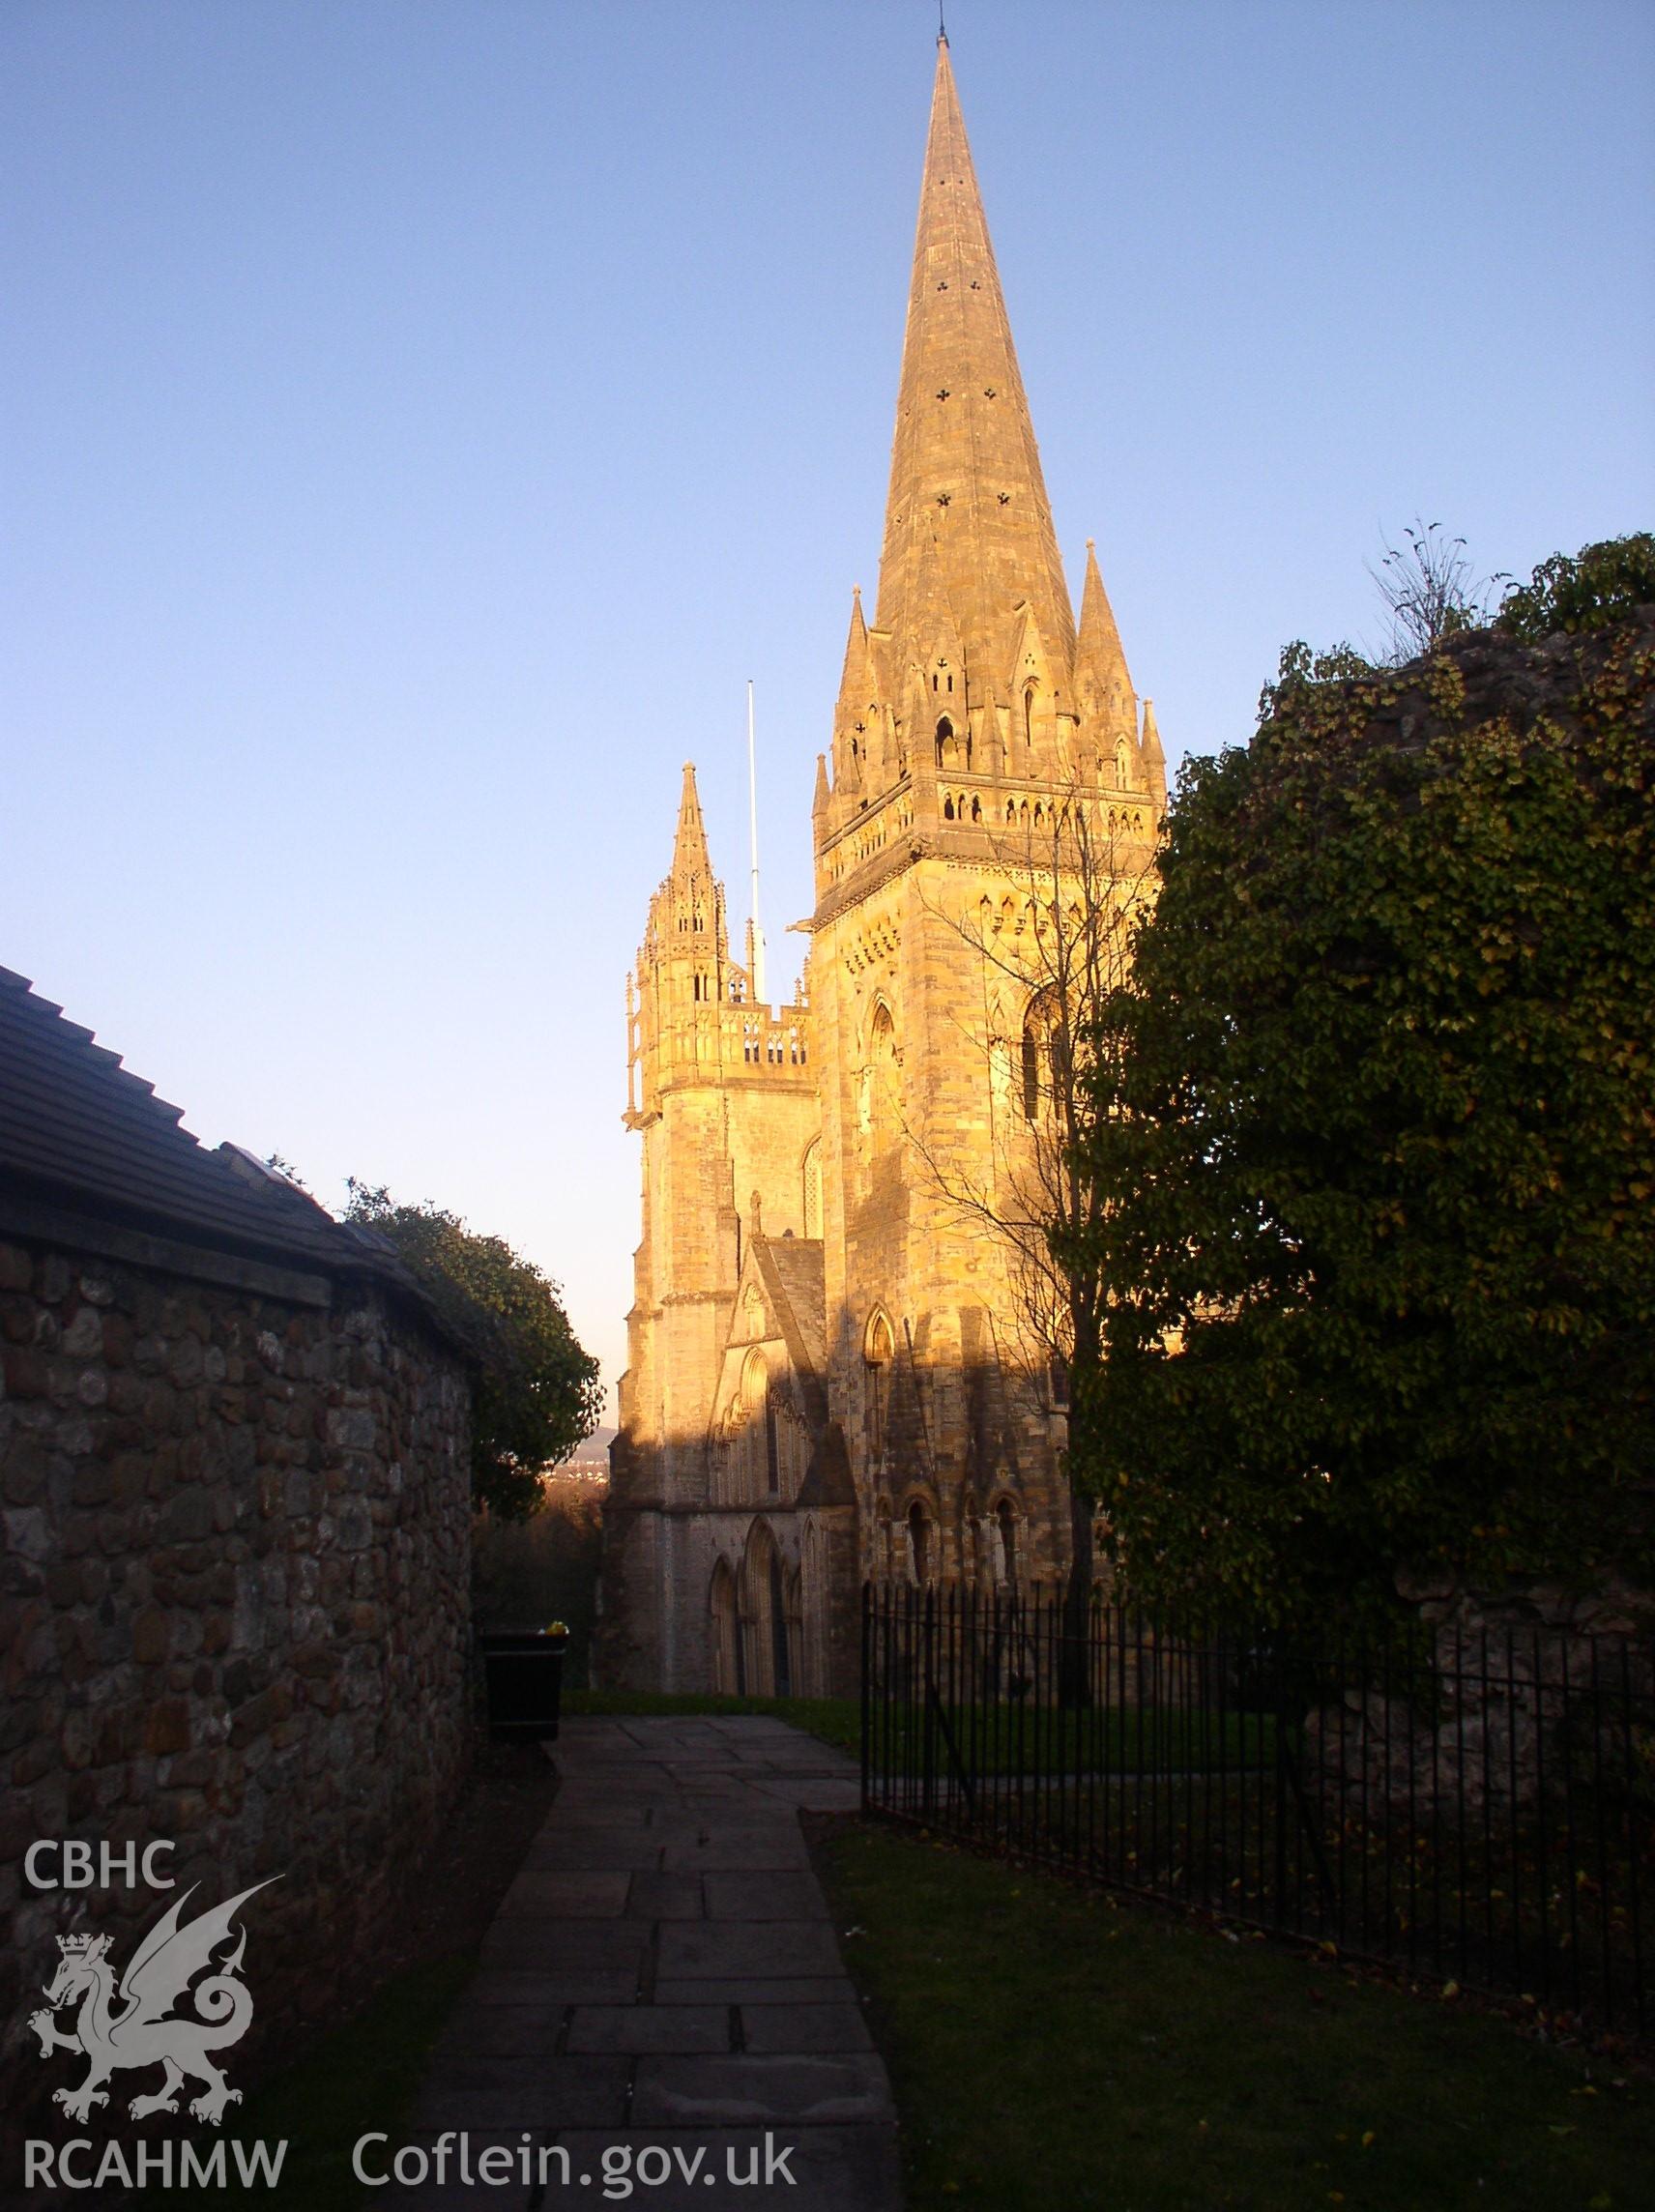 Colour digital photograph showing the exterior of Llandaff Cathedral, Cardiff.